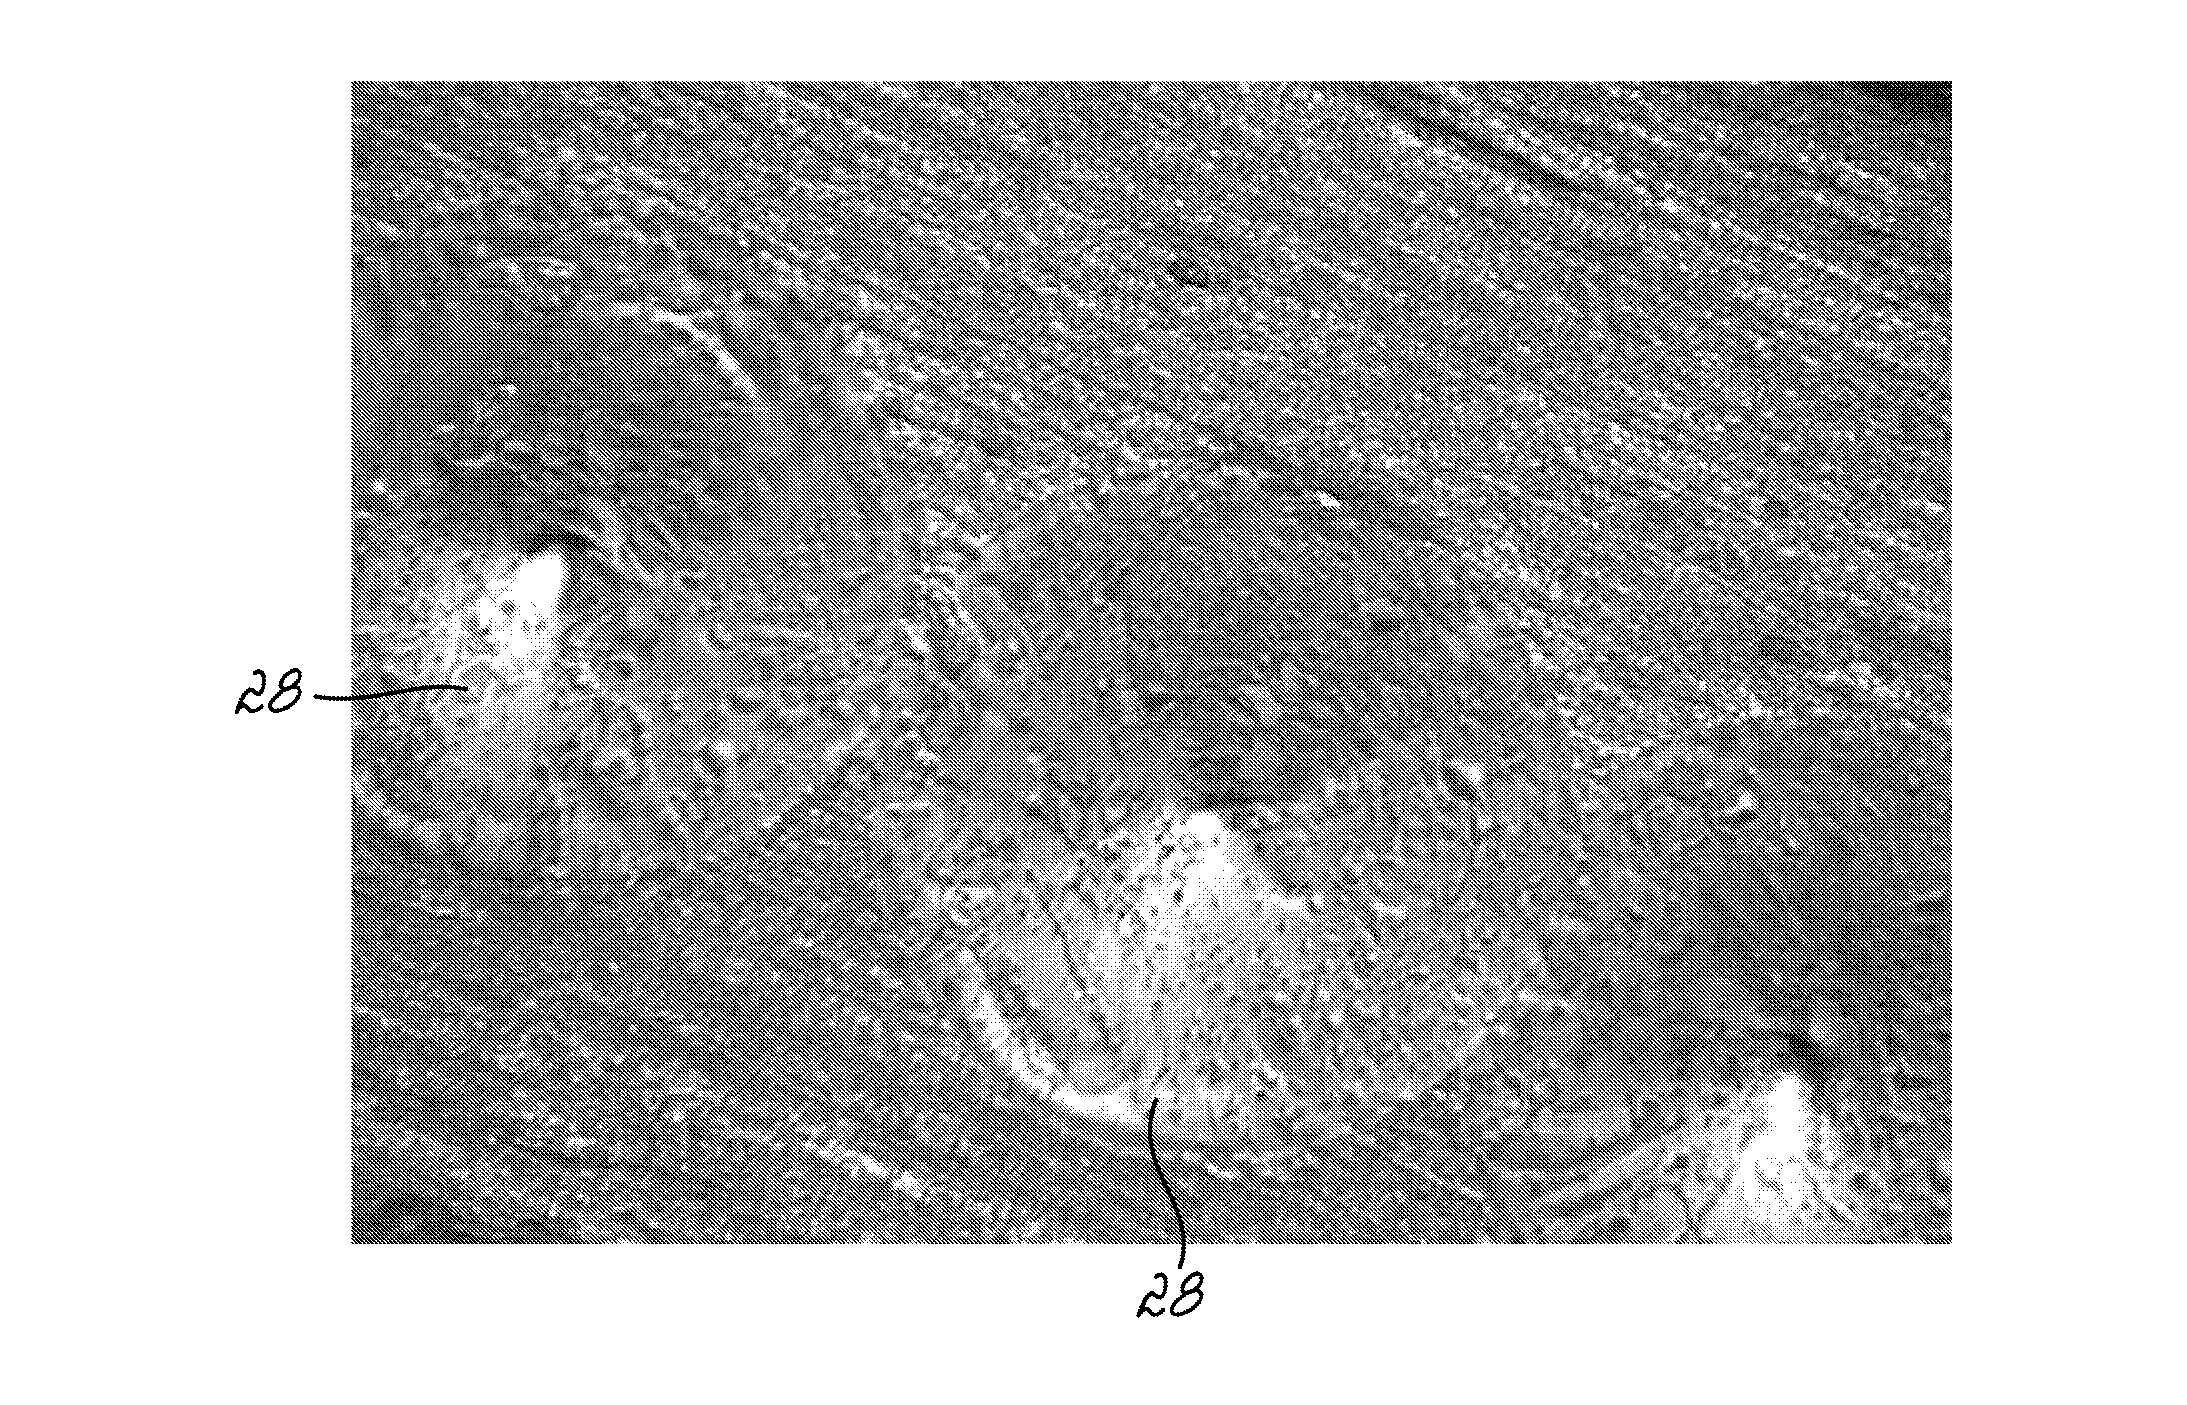 Orthodontic appliances and methods of making and using same